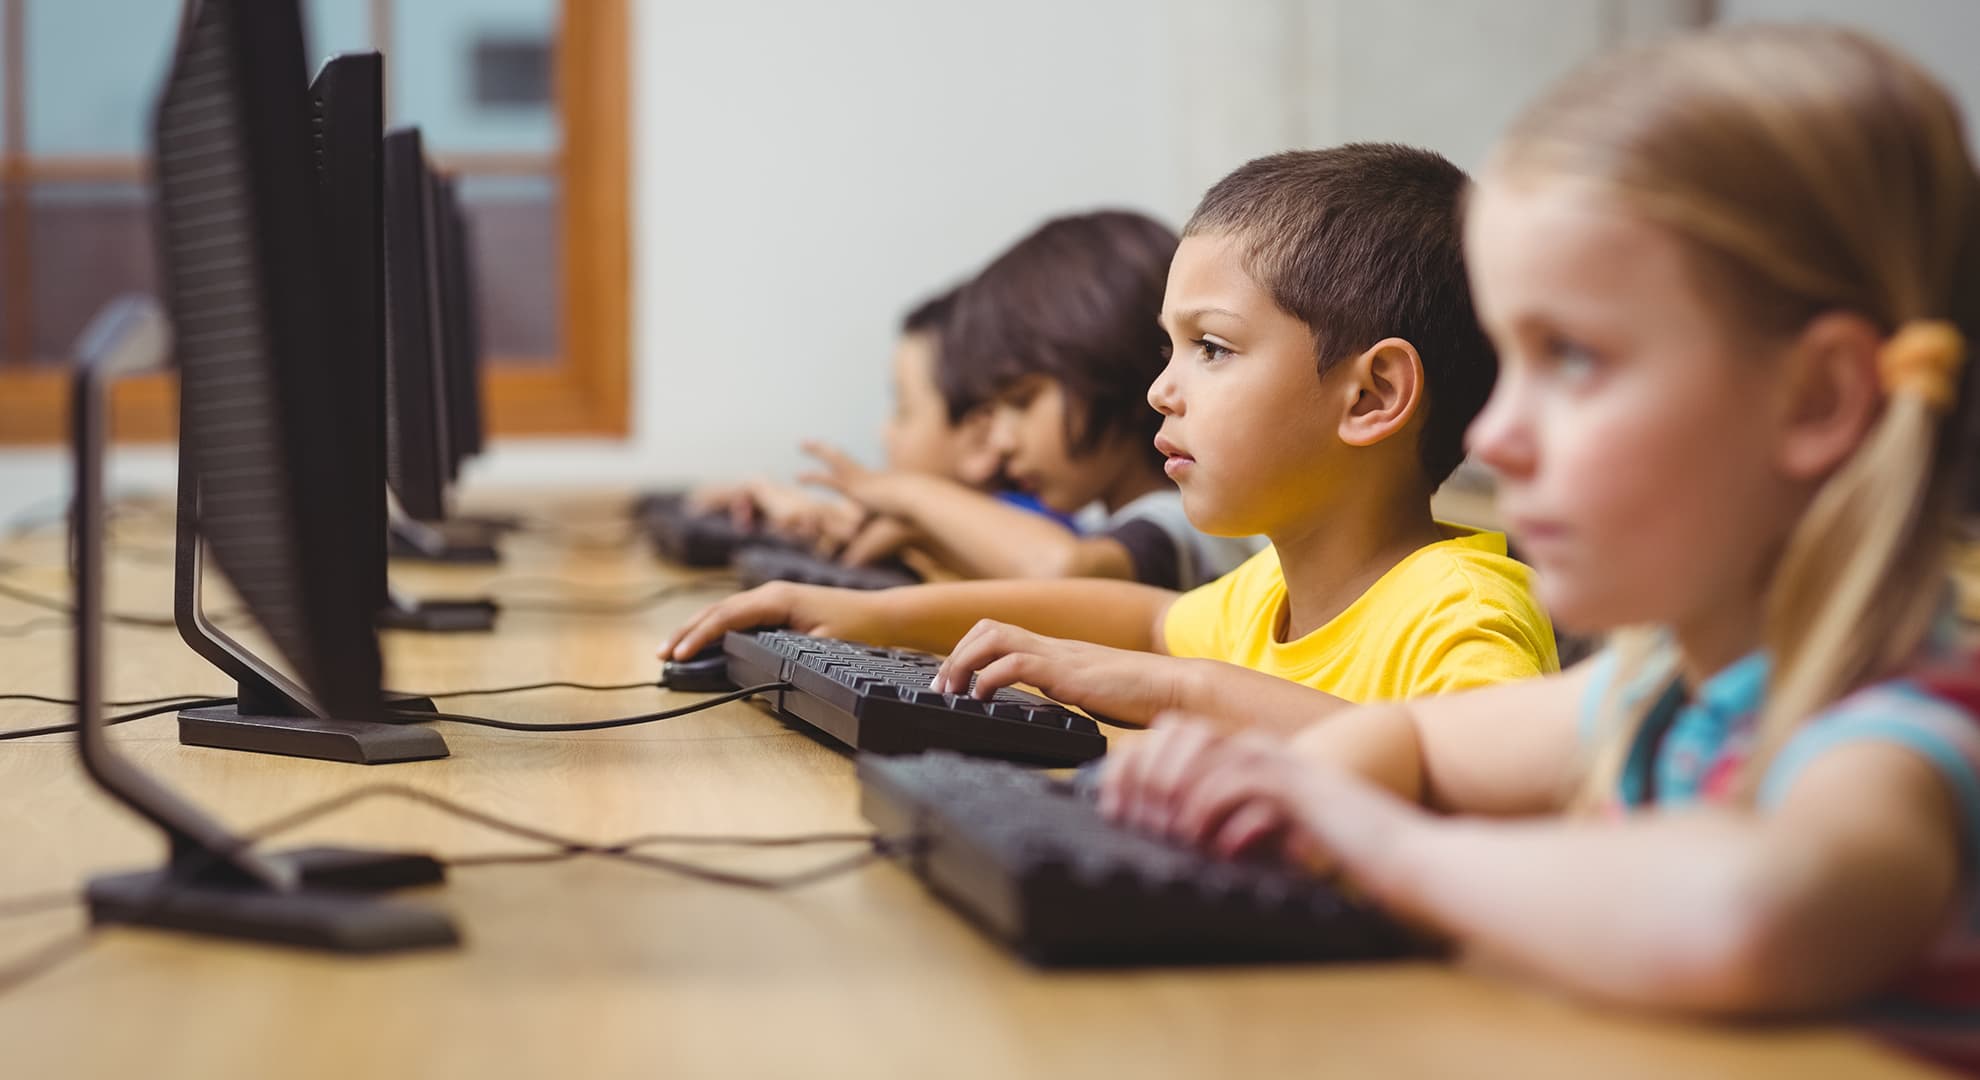 Children sitting at computers at their desk